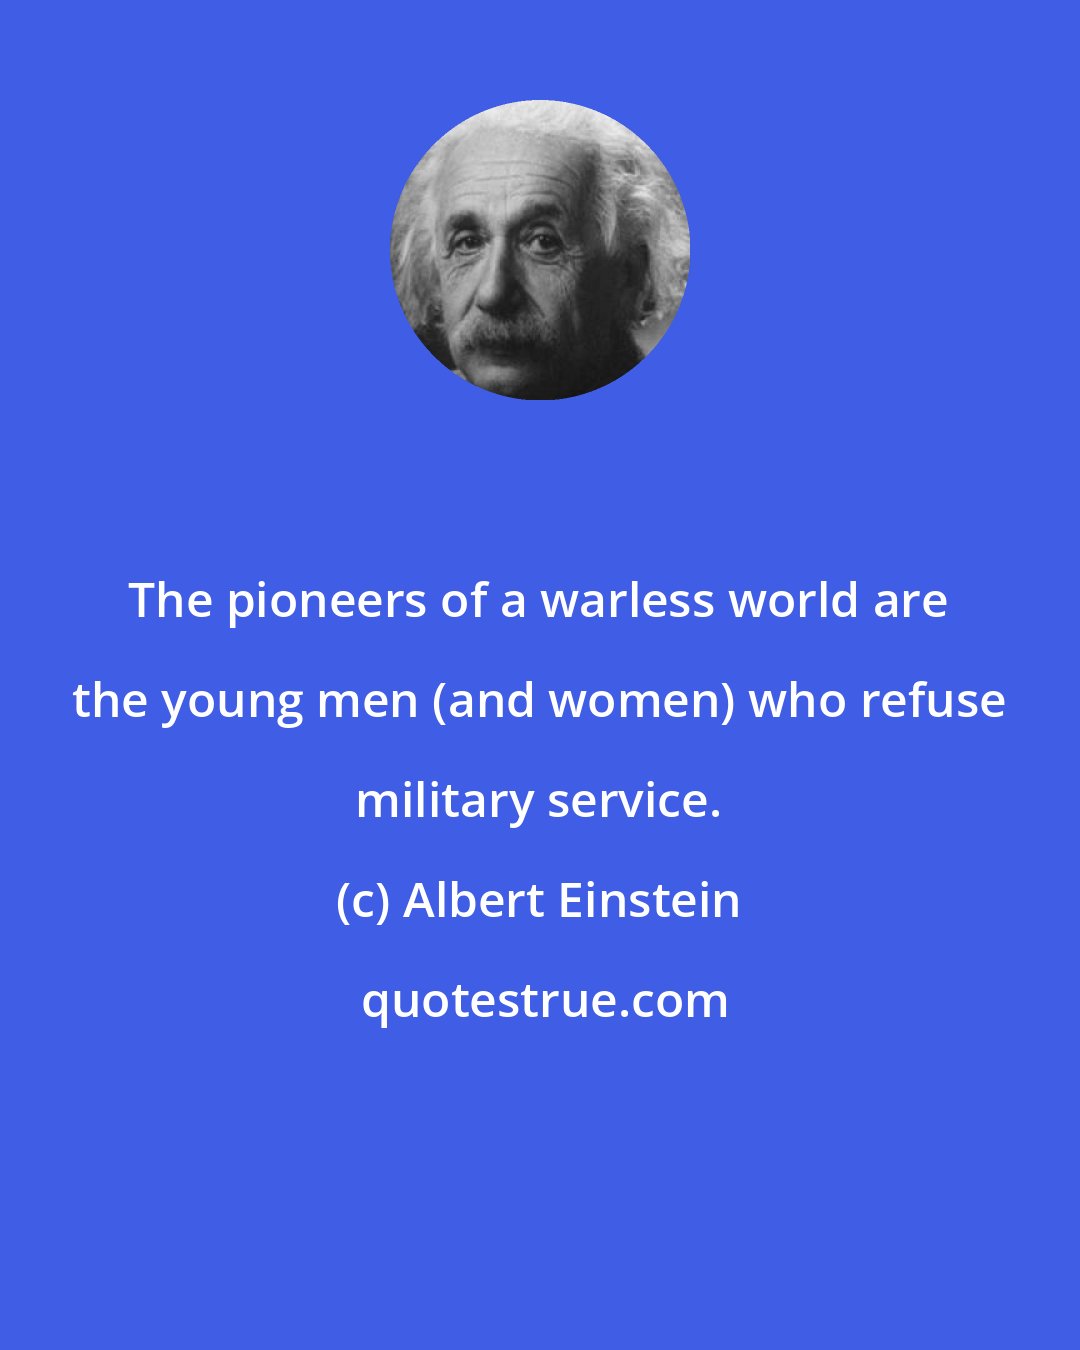 Albert Einstein: The pioneers of a warless world are the young men (and women) who refuse military service.